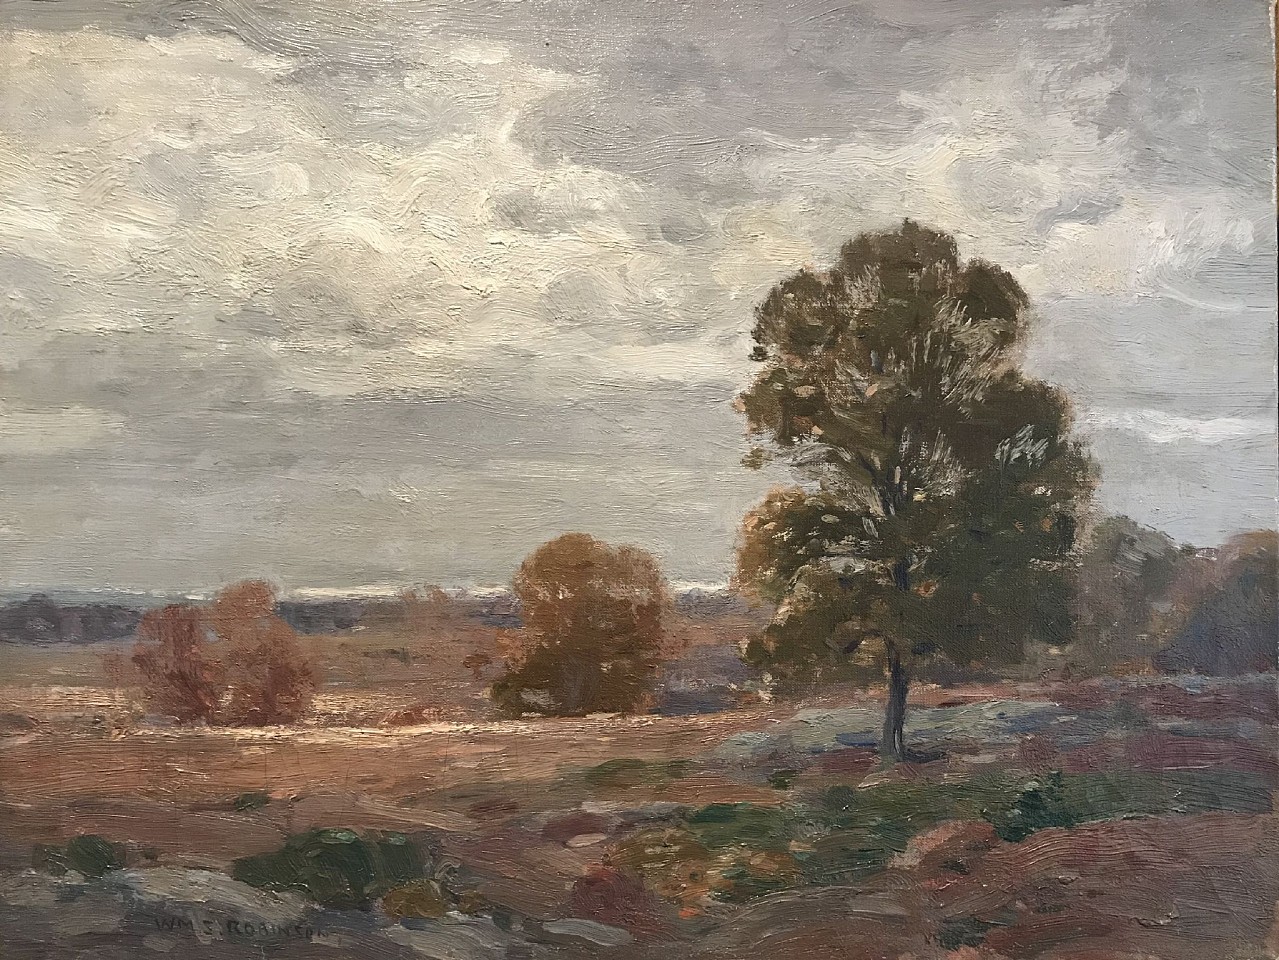 William S. Robinson, Old Lyme
oil on canvas, 15" x 19 3/4"
signed Wm S Robinson, lower left
JCA 6279
$3,000